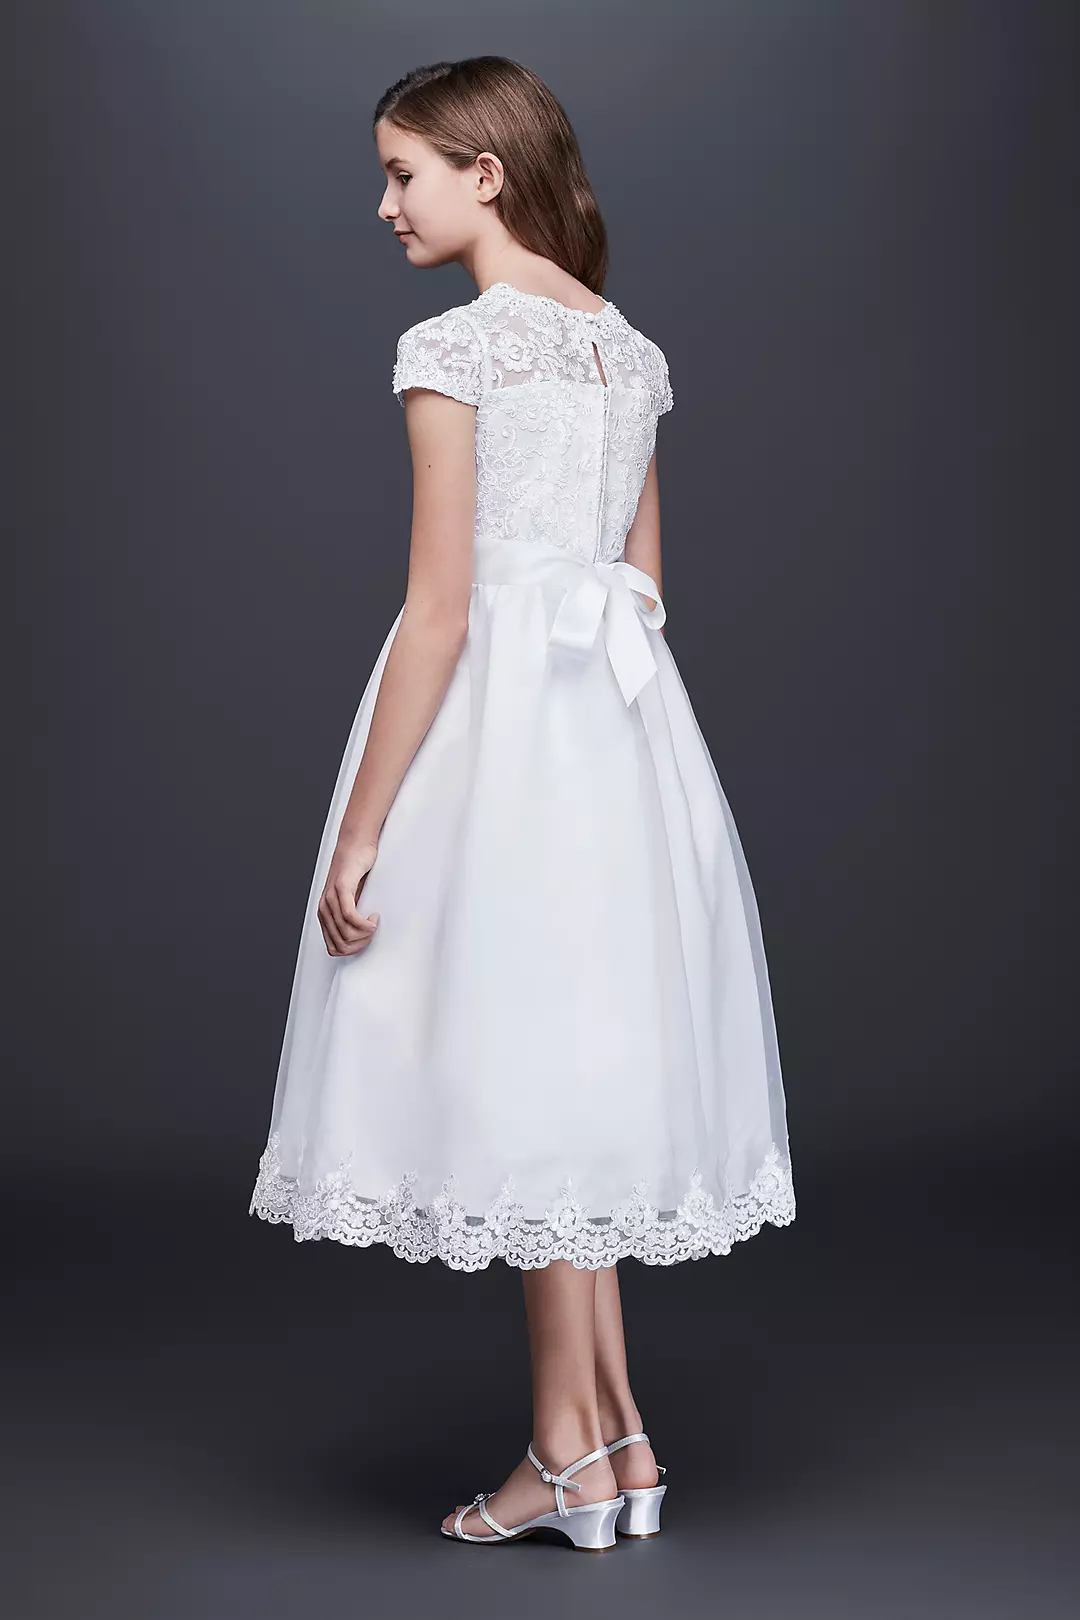 Illusion Flower Girl Dress with Appliqued Skirt Image 2